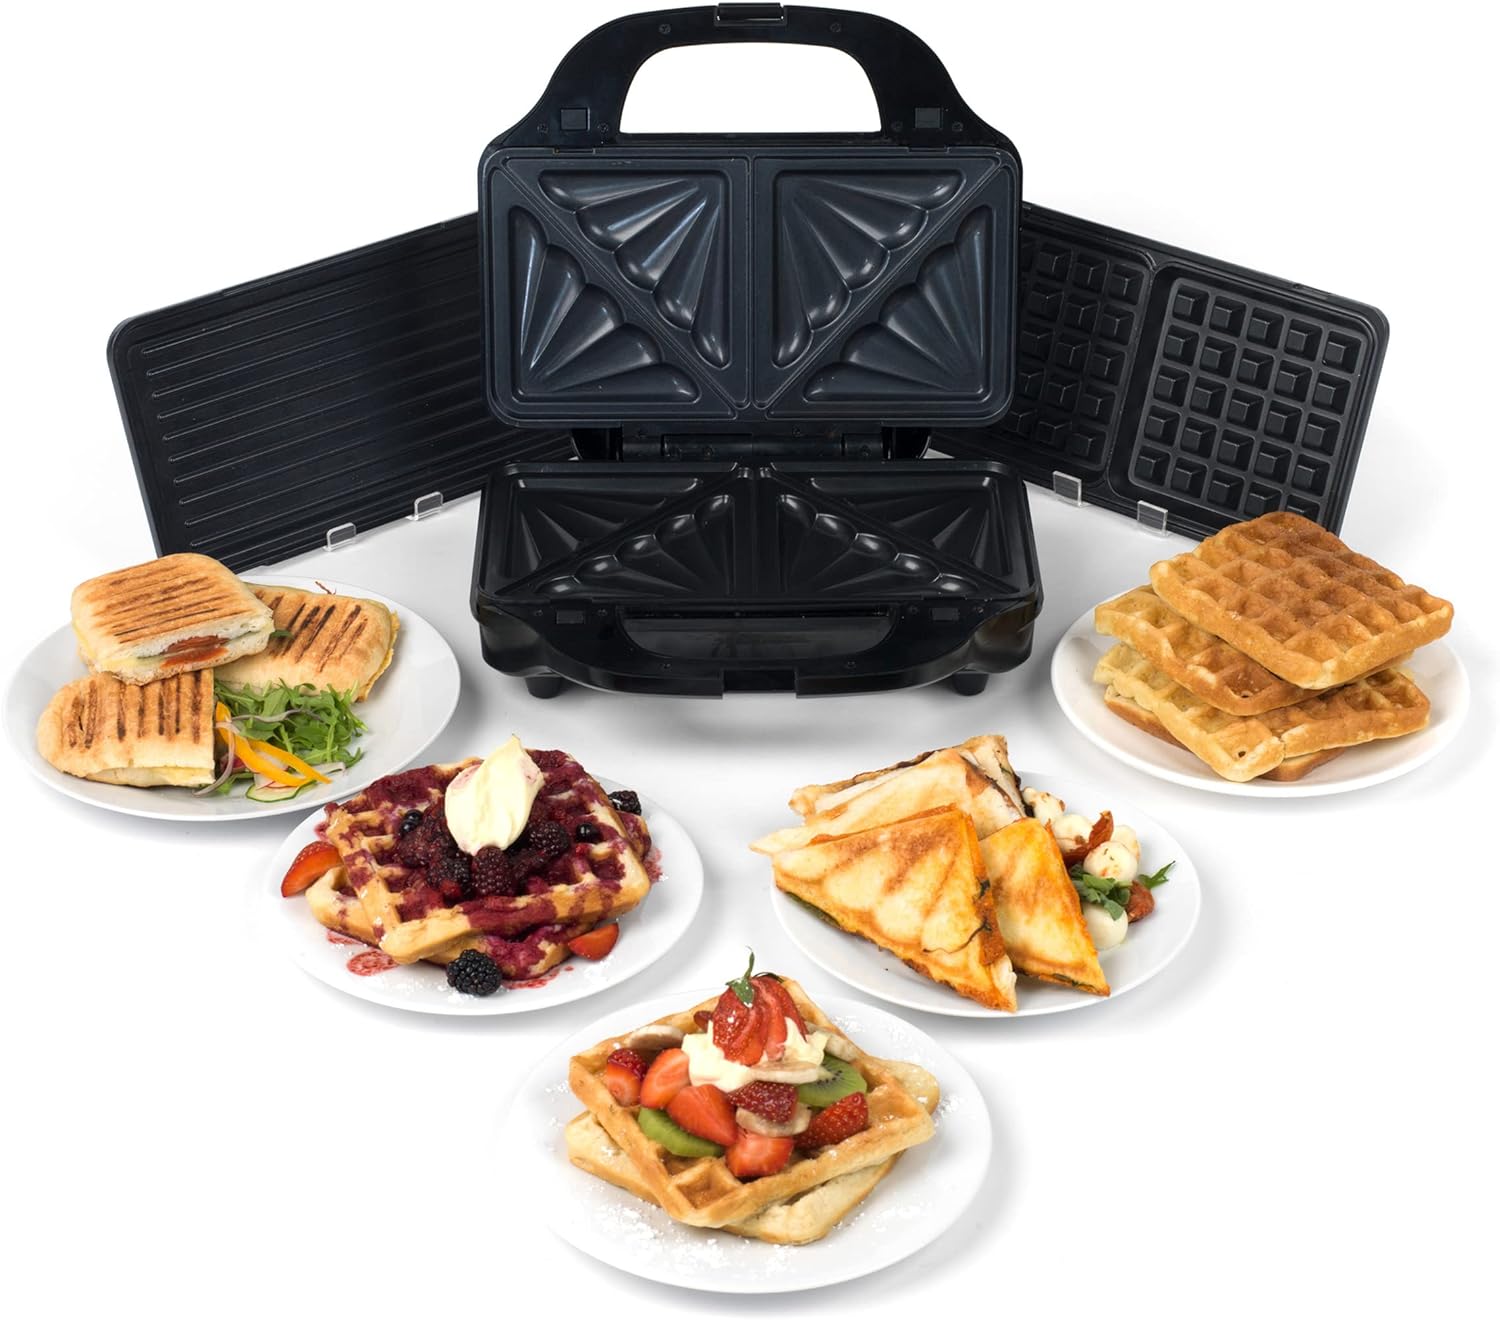 Salter EK3677 Non - Stick Toastie Maker - Diamond Handbag Shaped Sandwich Toaster, Snack Machine, Compact Design, Cool Touch Handle, Panini Press, Pre - Heat In 3 Minutes, Power & Ready Indicator Lights - Amazing Gadgets Outlet